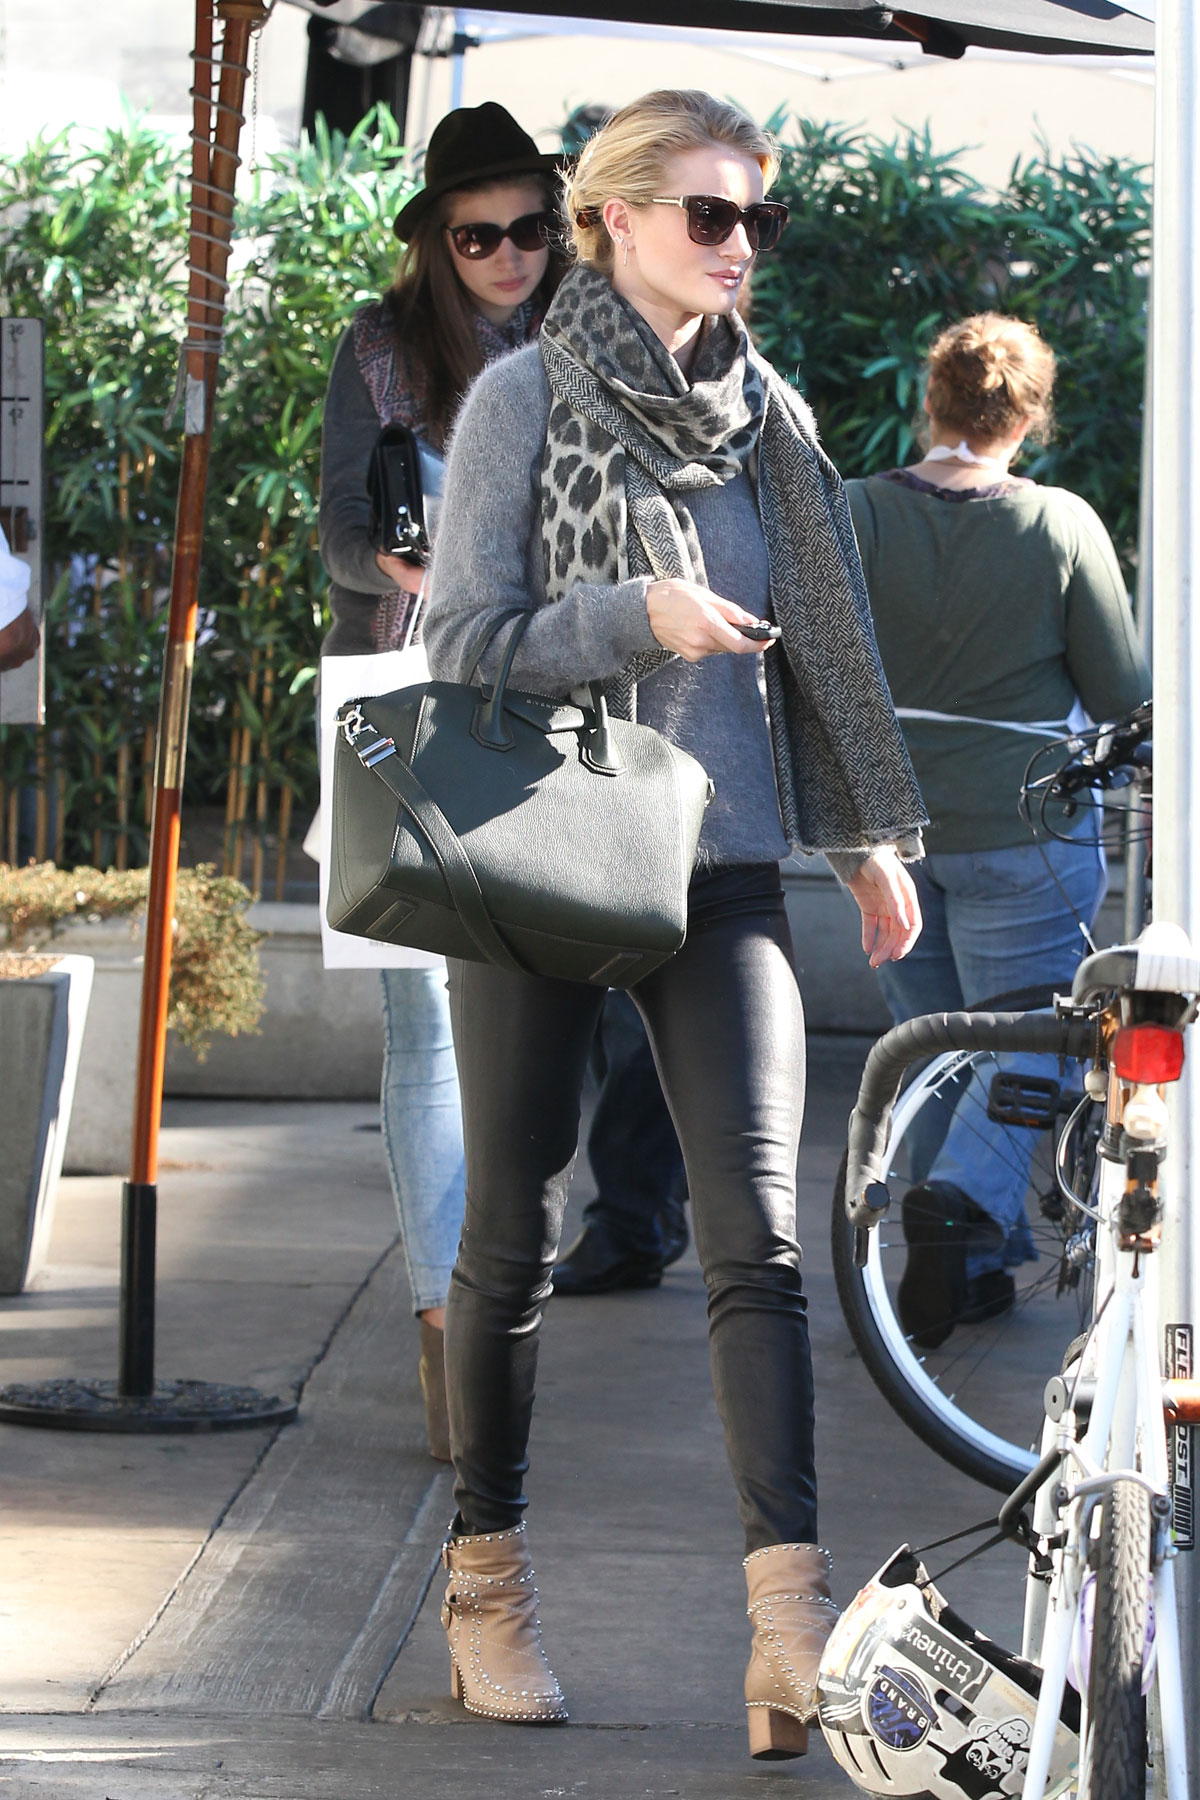 Rosie Huntington-Whiteley shops at a Hollywood Bristol Farms grocery store